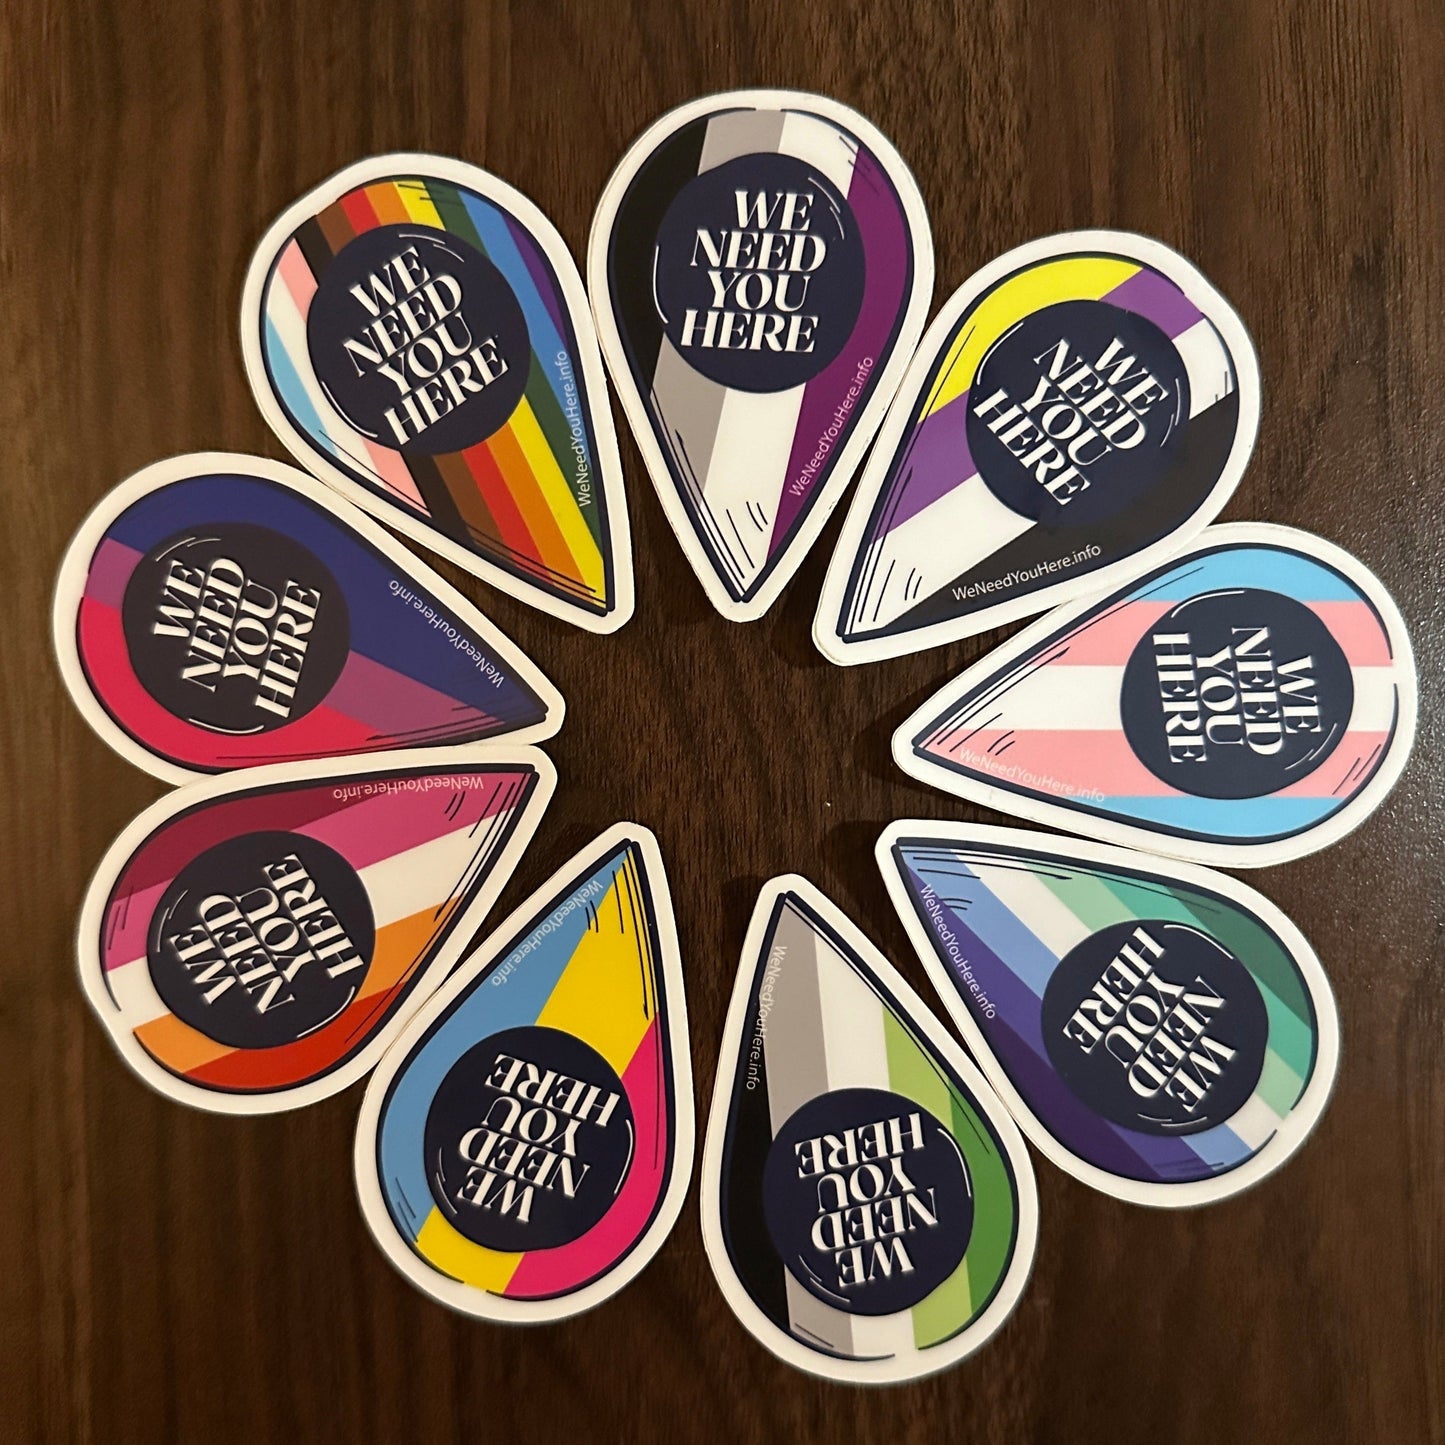 We Need You Here Sticker - Pan Pride - Full Size